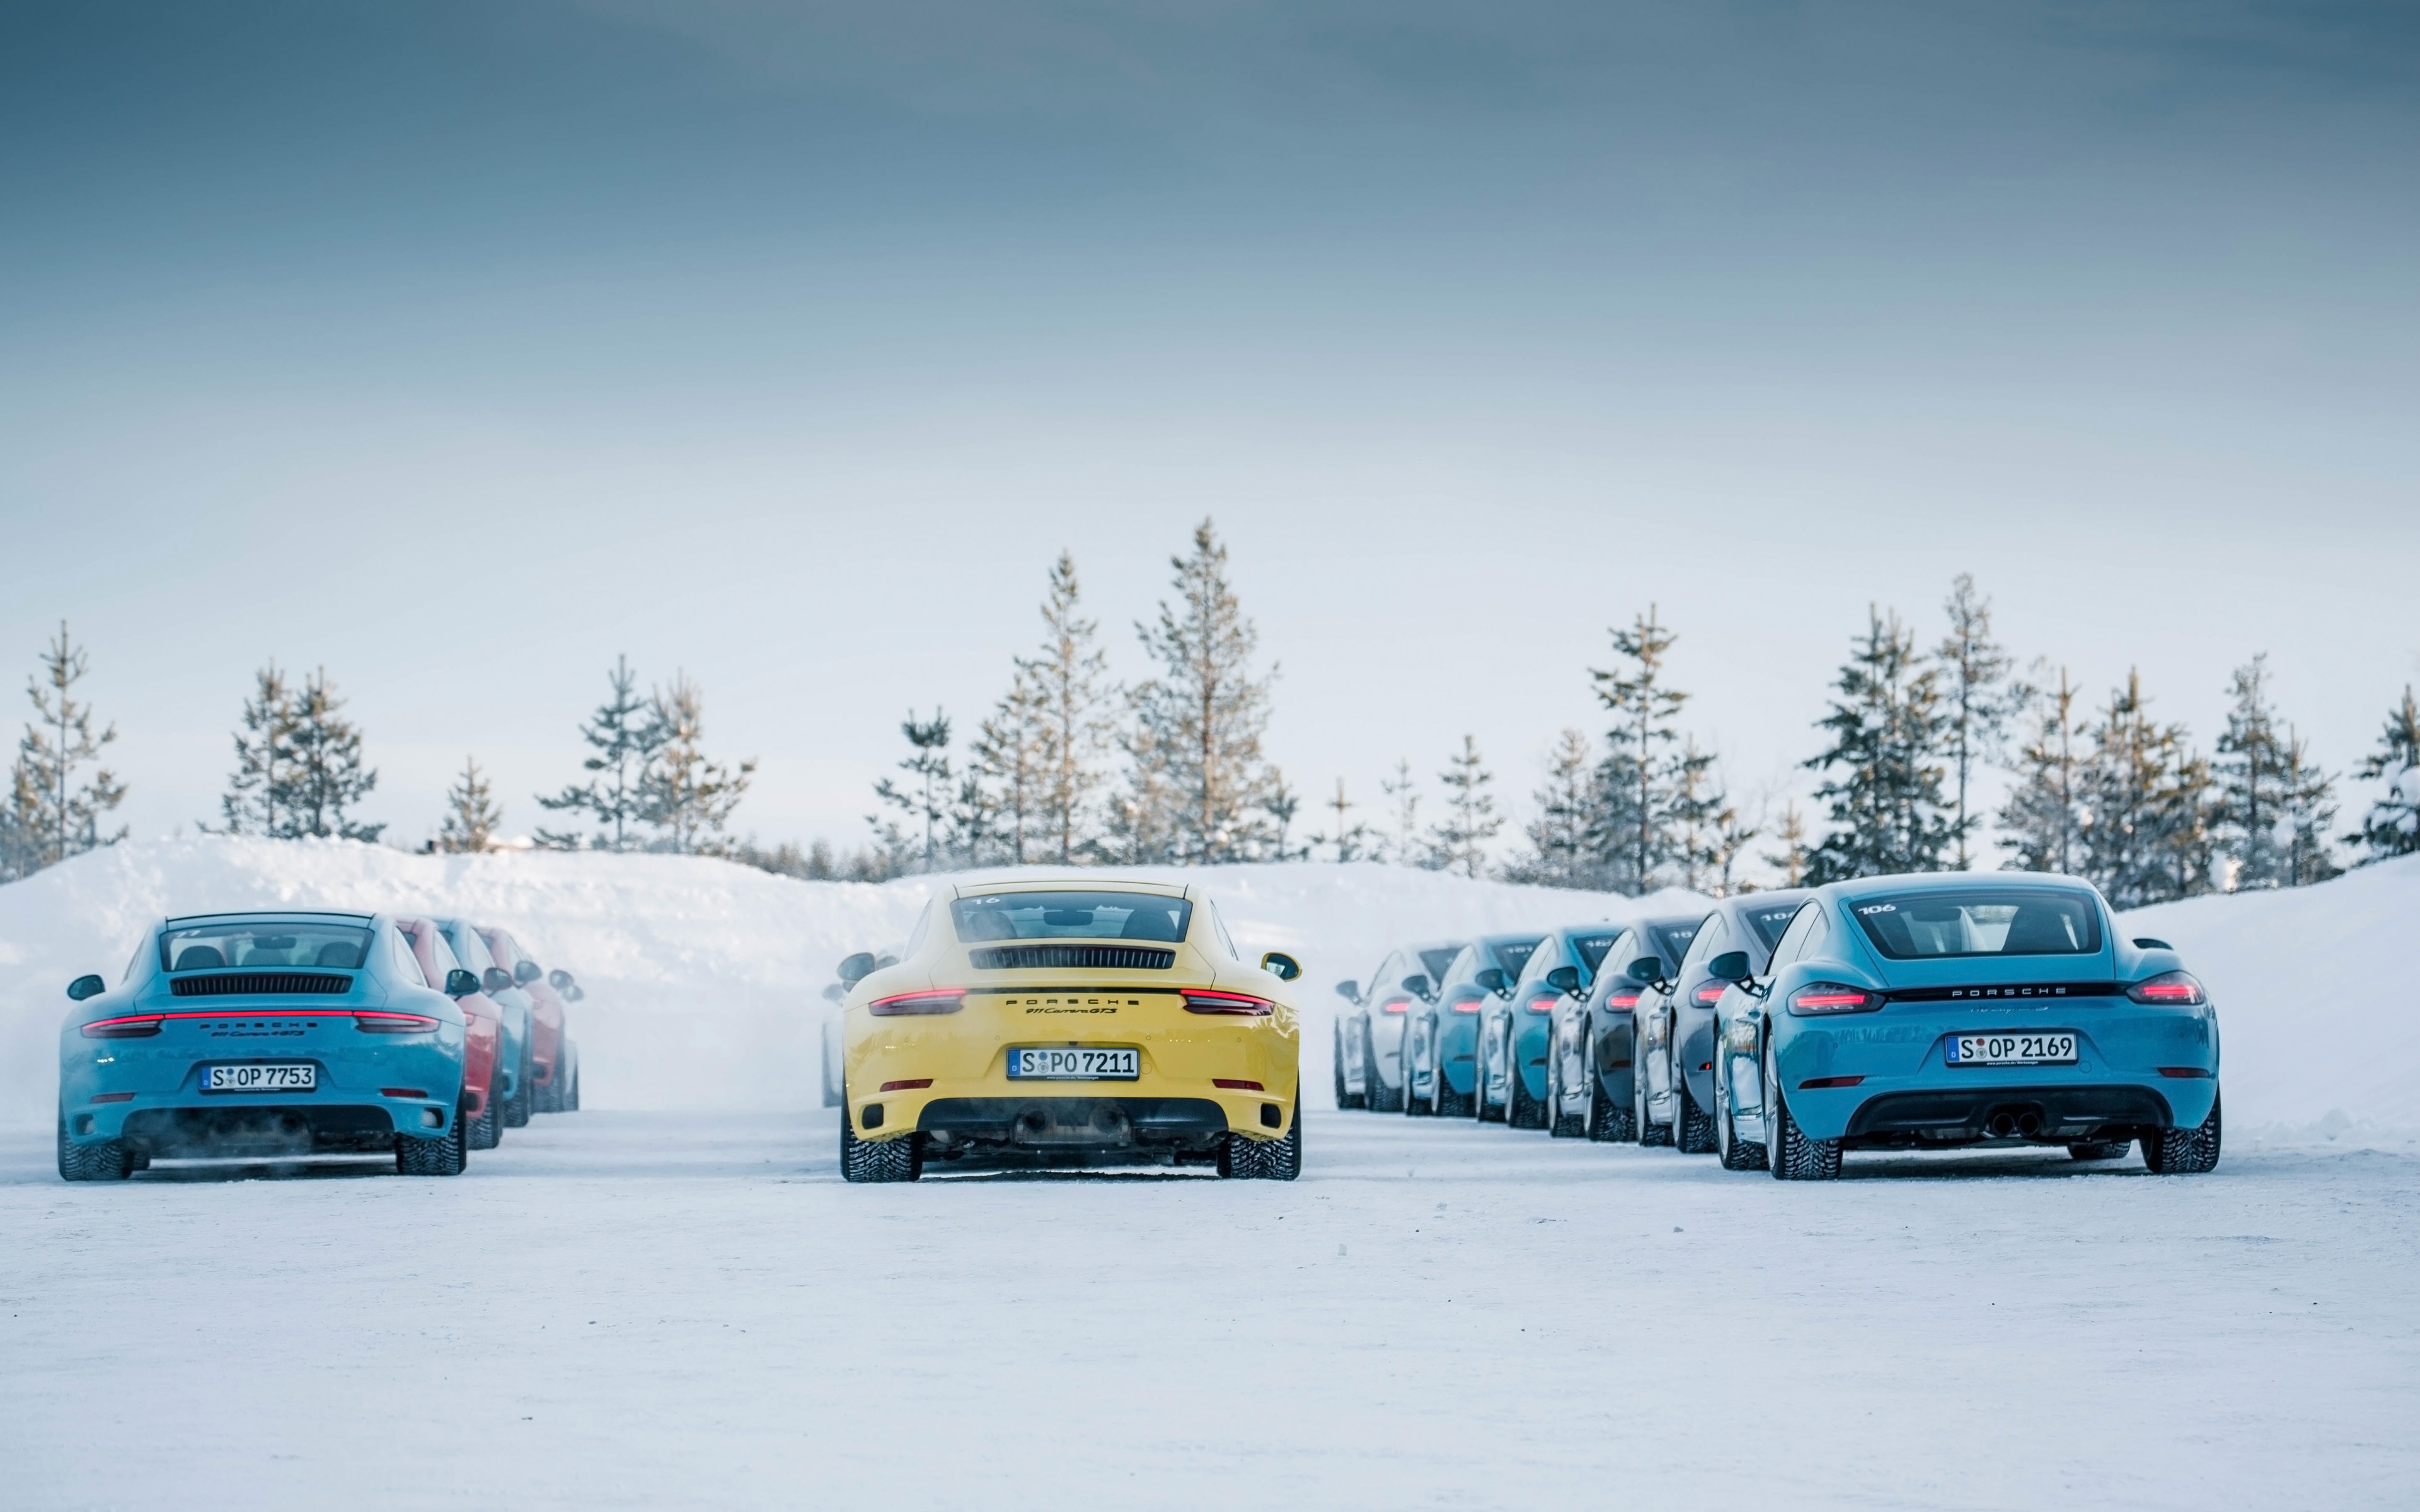 A large convoy of porsche 911s on a winter road